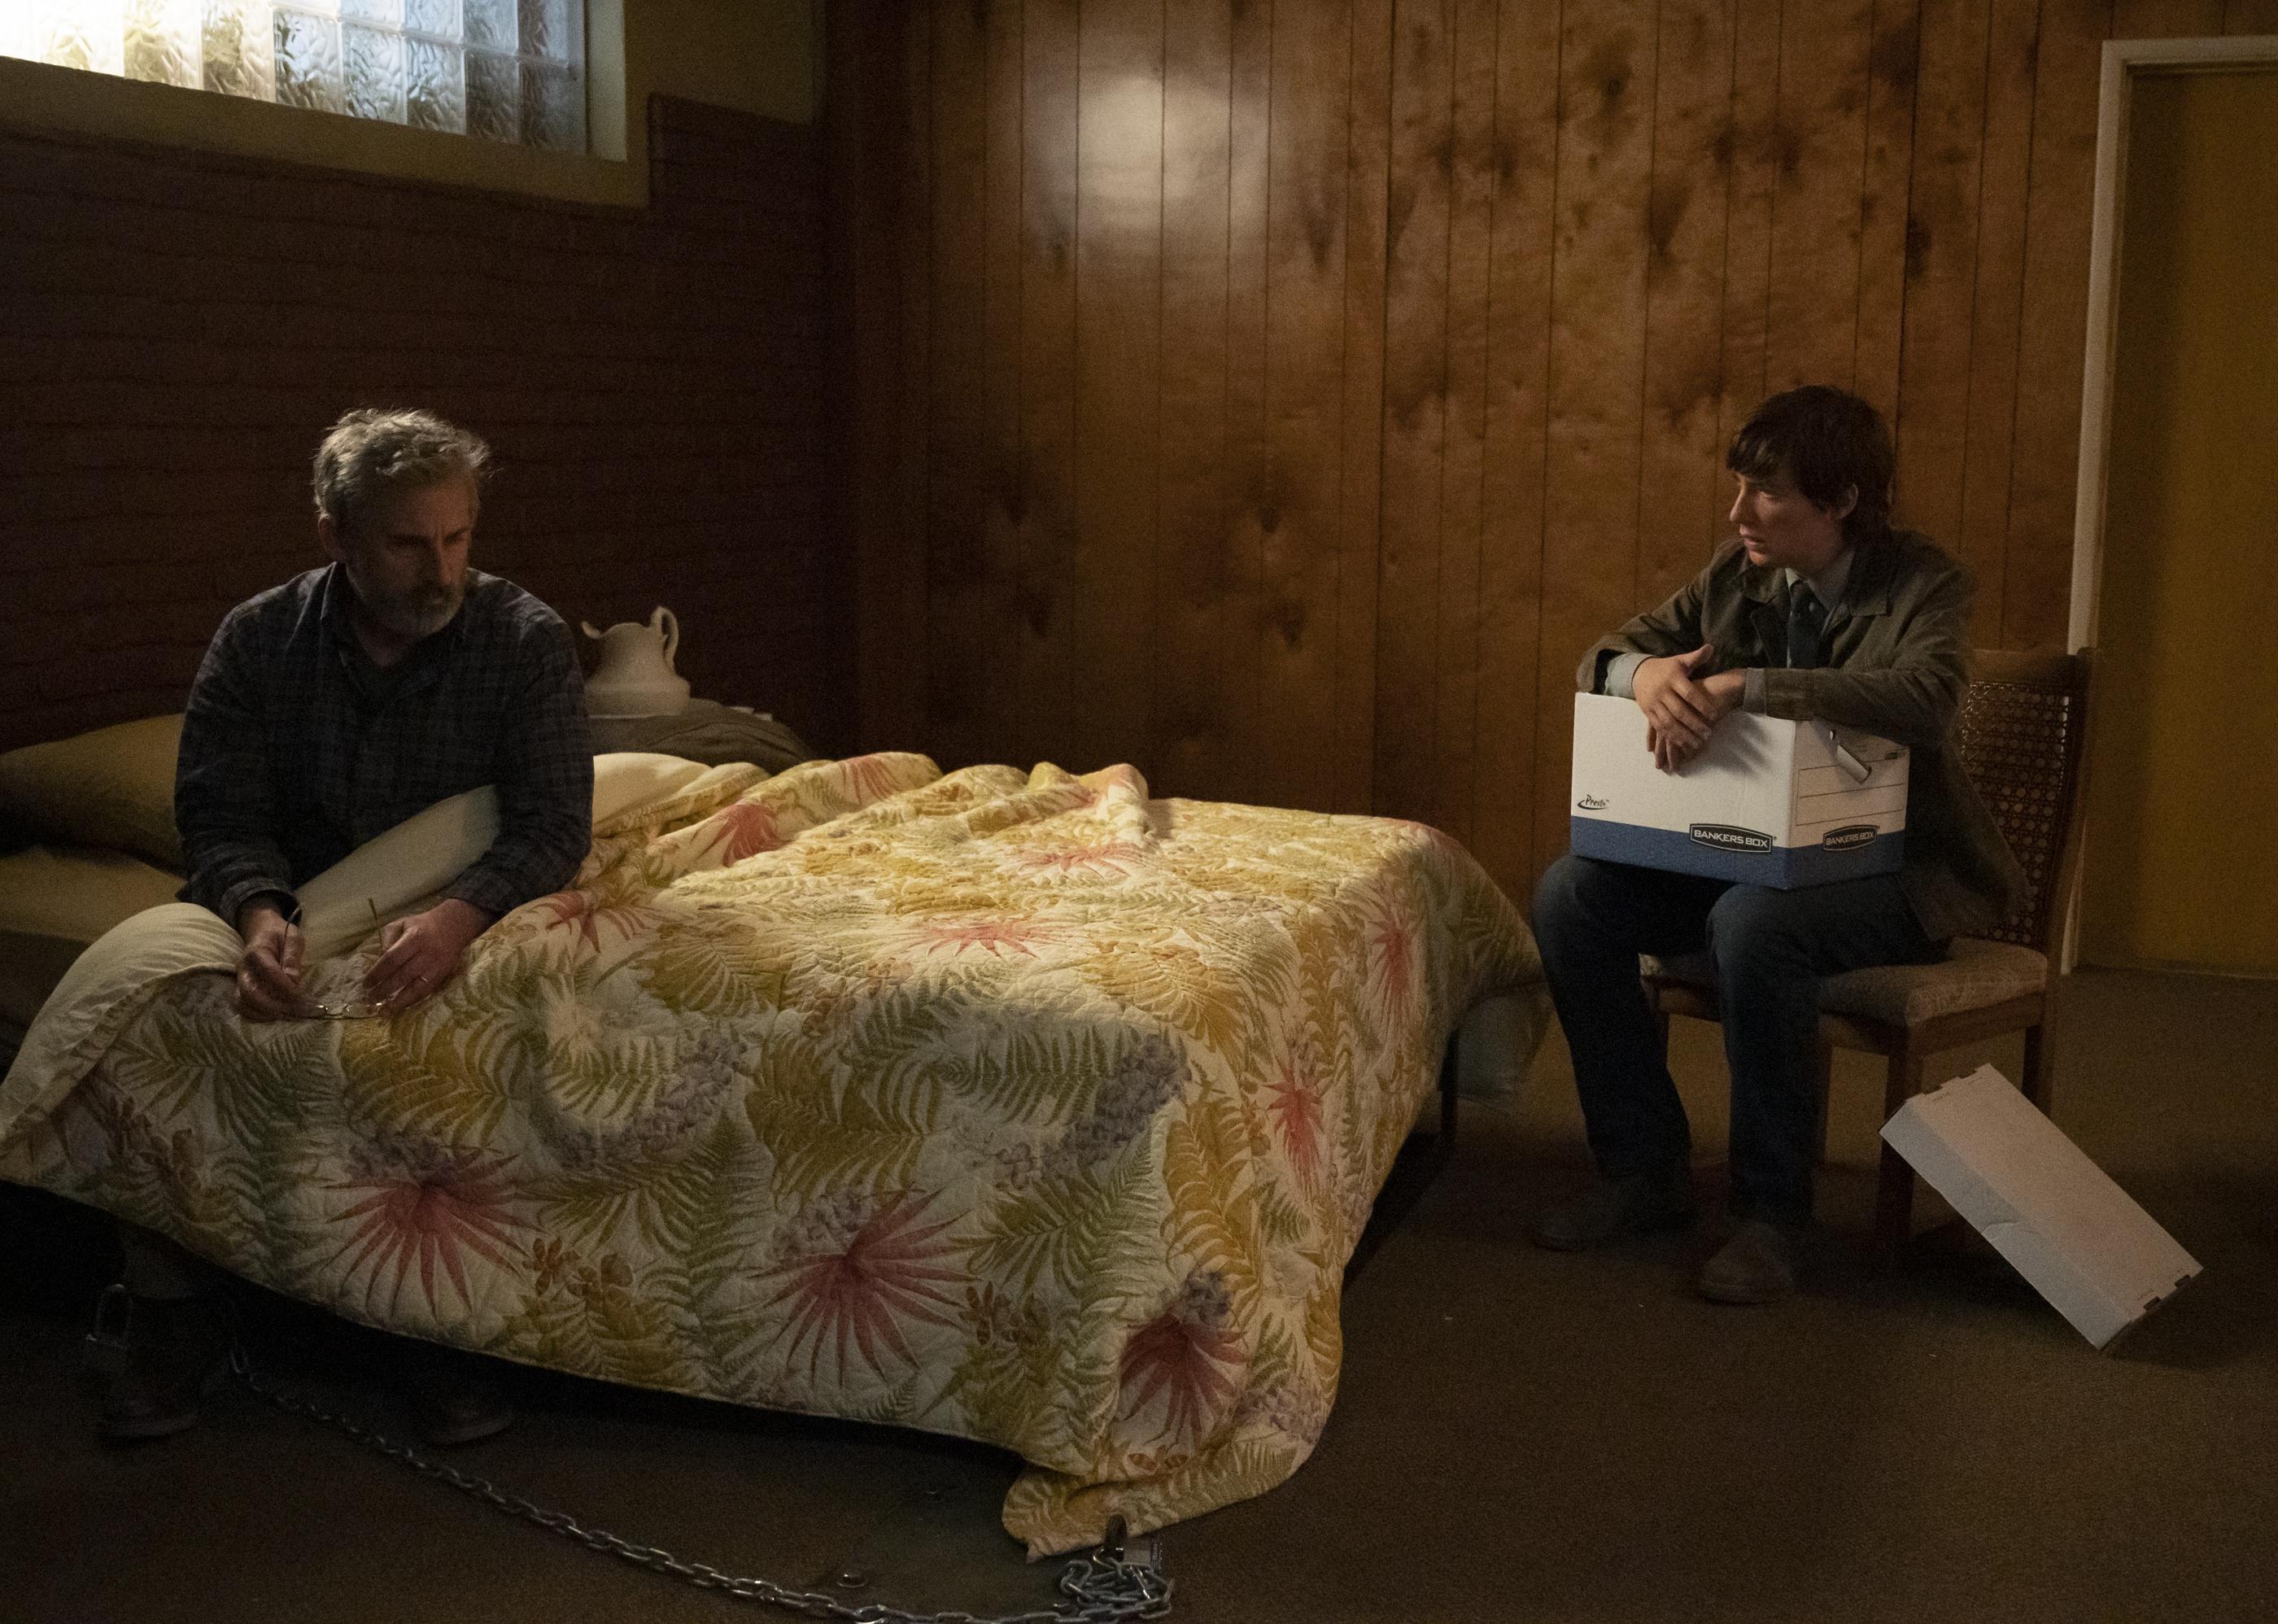 Steve Carell sitting chained to a bed as Domhnall Gleeson sits next to the bed in a chair holding a file box.